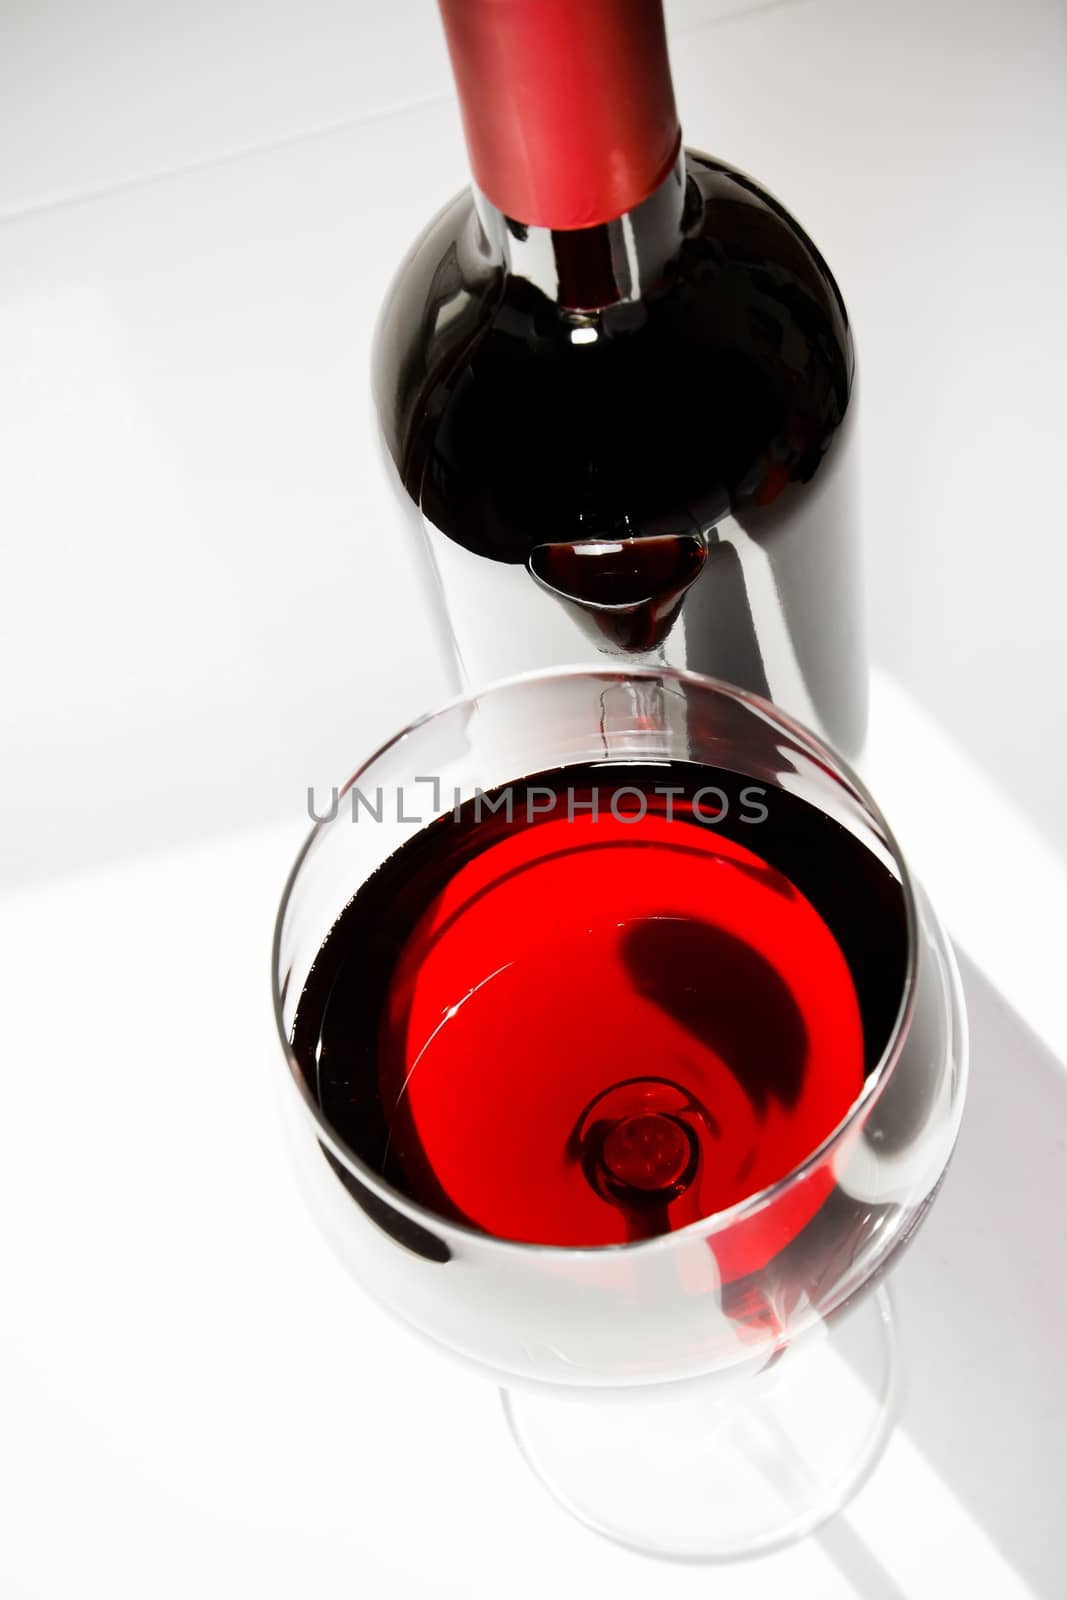 red wine glass near a bottle under daily light by donfiore